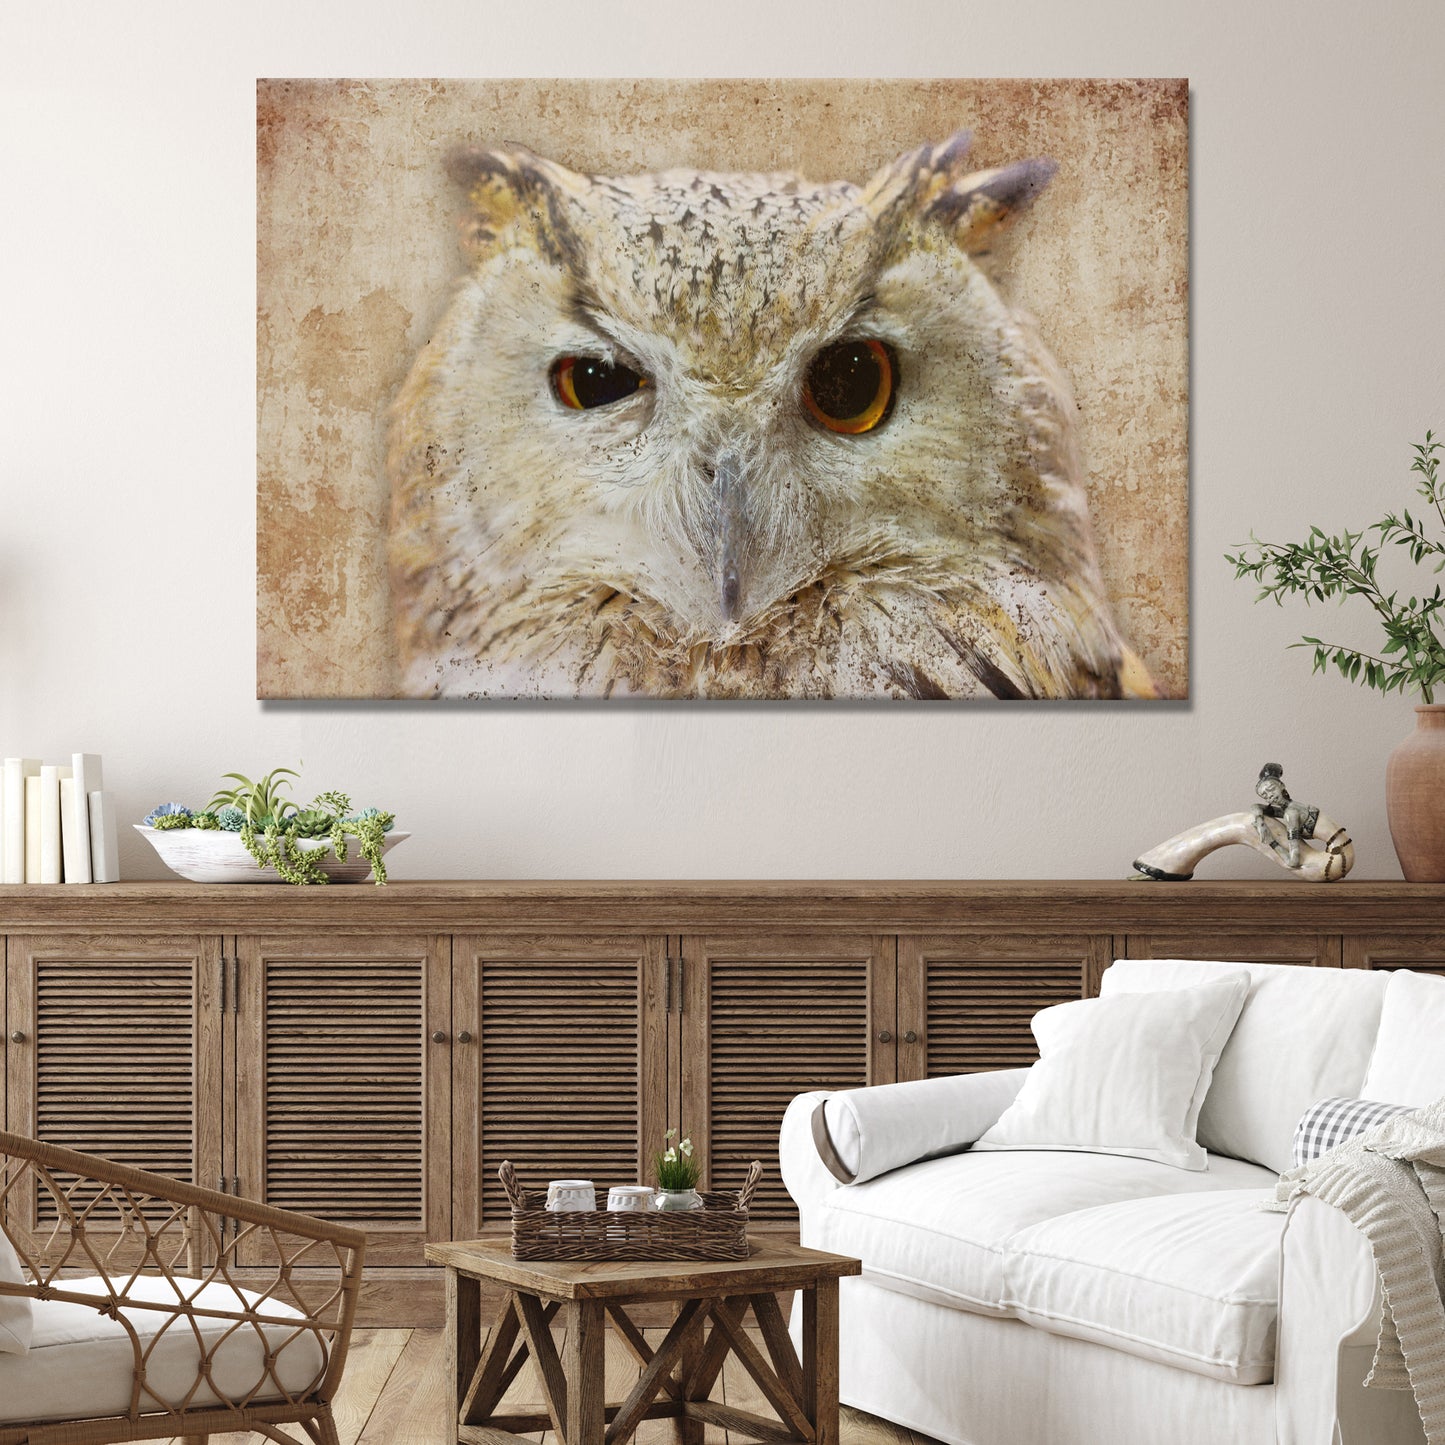 Your Owl Next Door Canvas Wall Art Style 1 - Image by Tailored Canvases